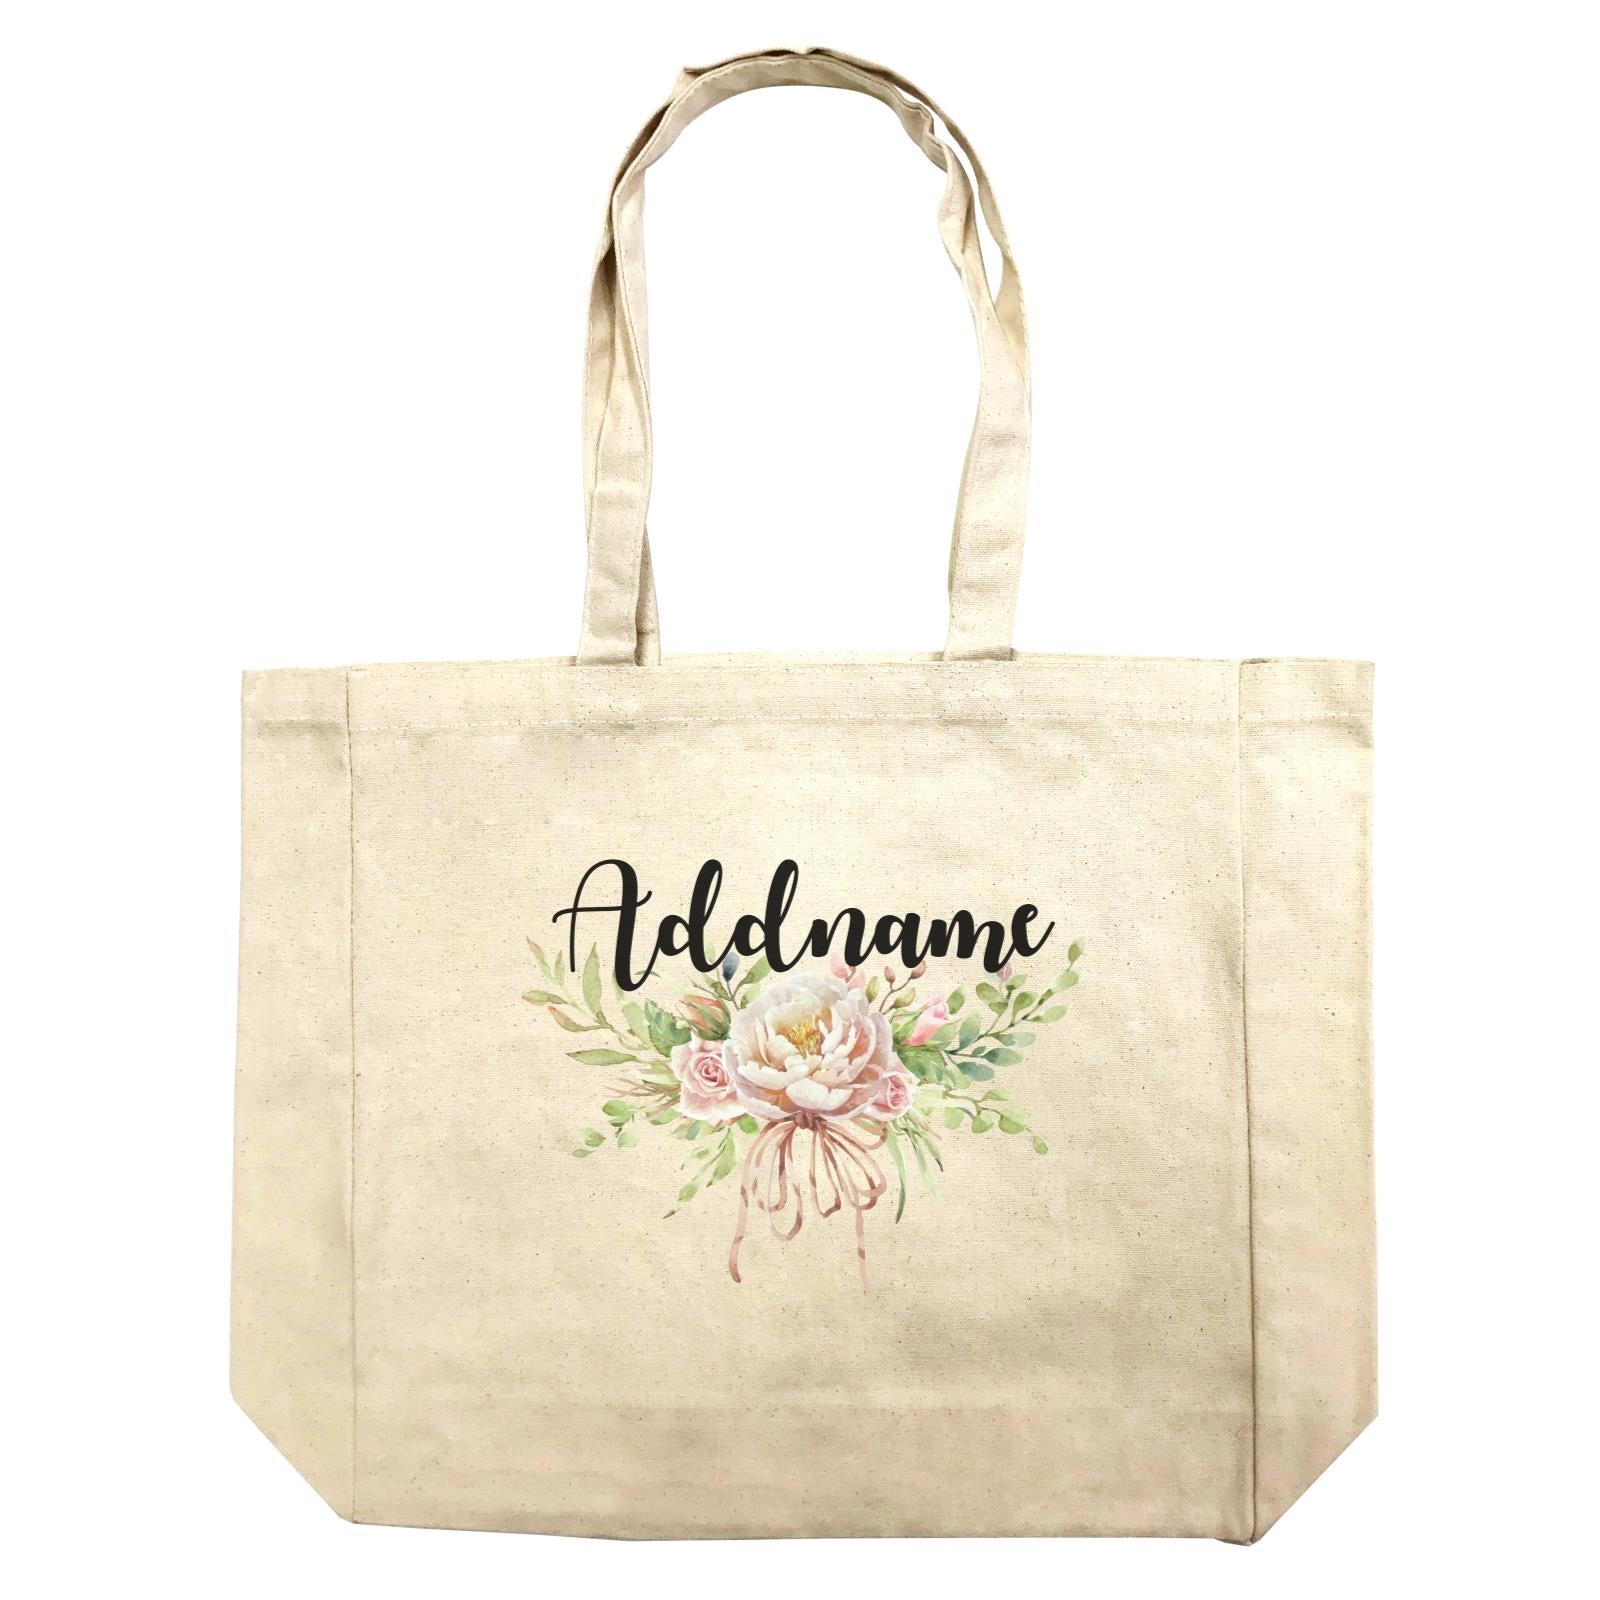 Floral Sweet 2 Watercolour Big Flower Addname Shopping Bag